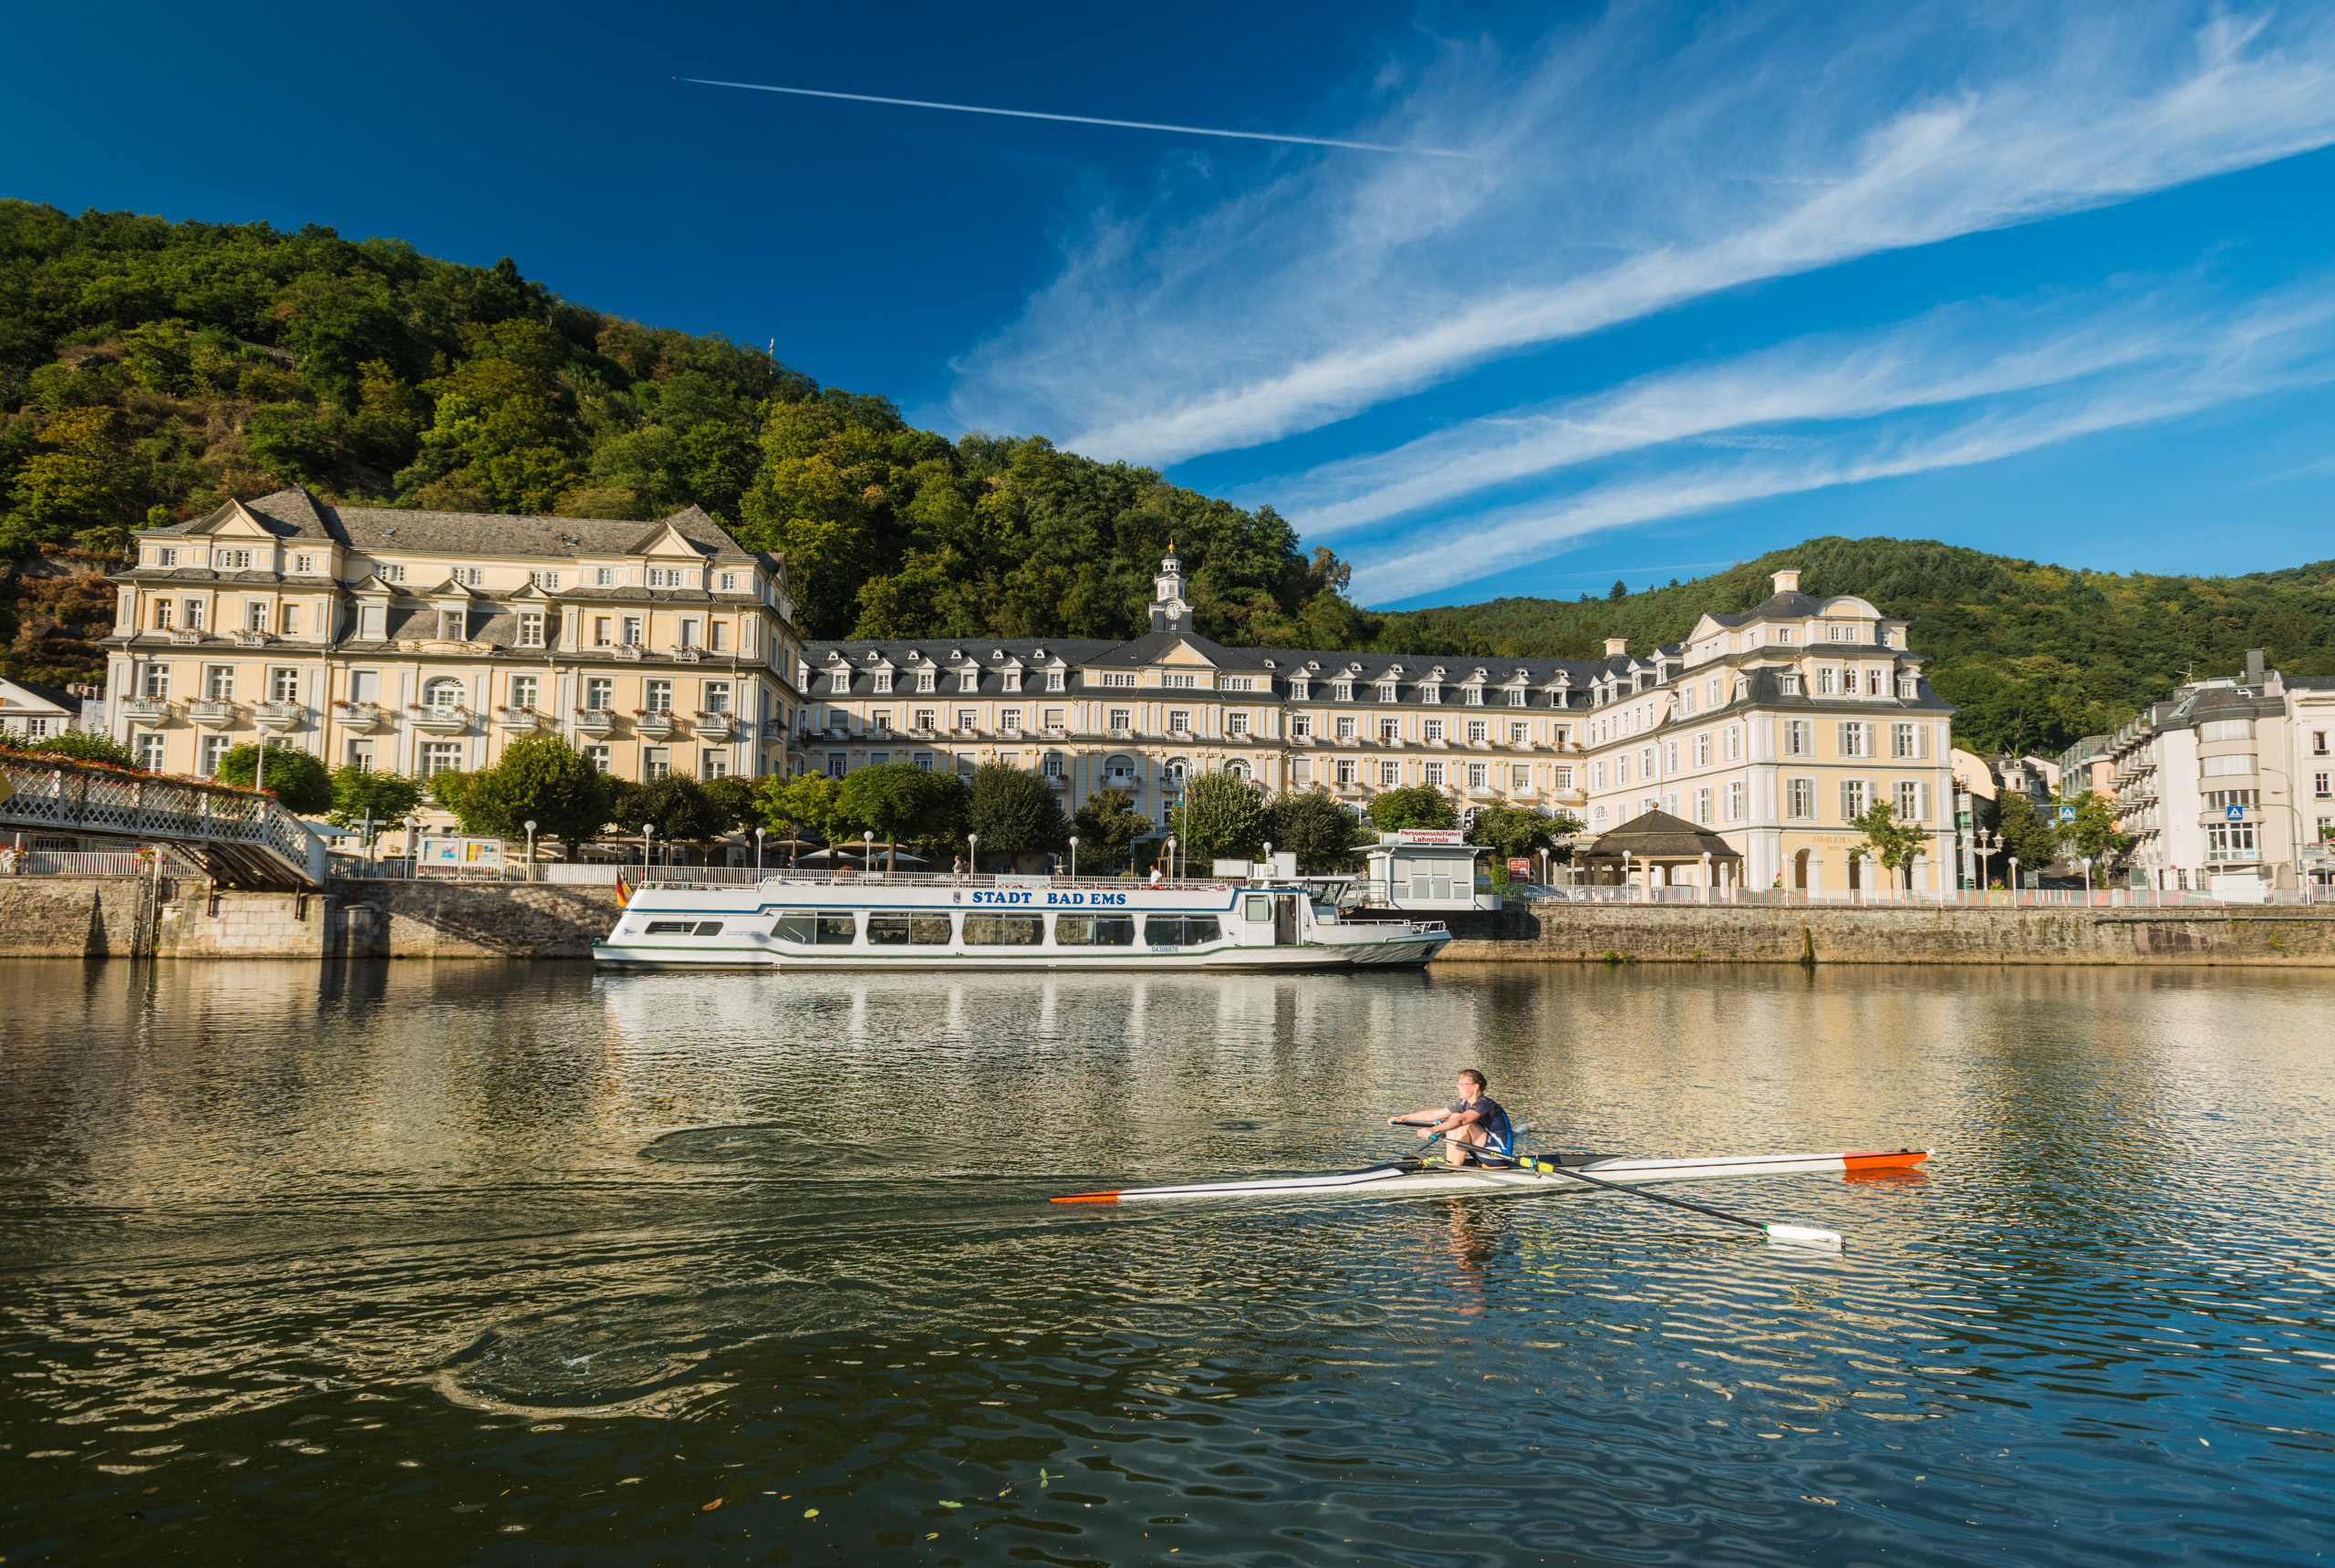 The Kurhaus in Bad Ems - one of an ensemble of riverside thermal architecture.